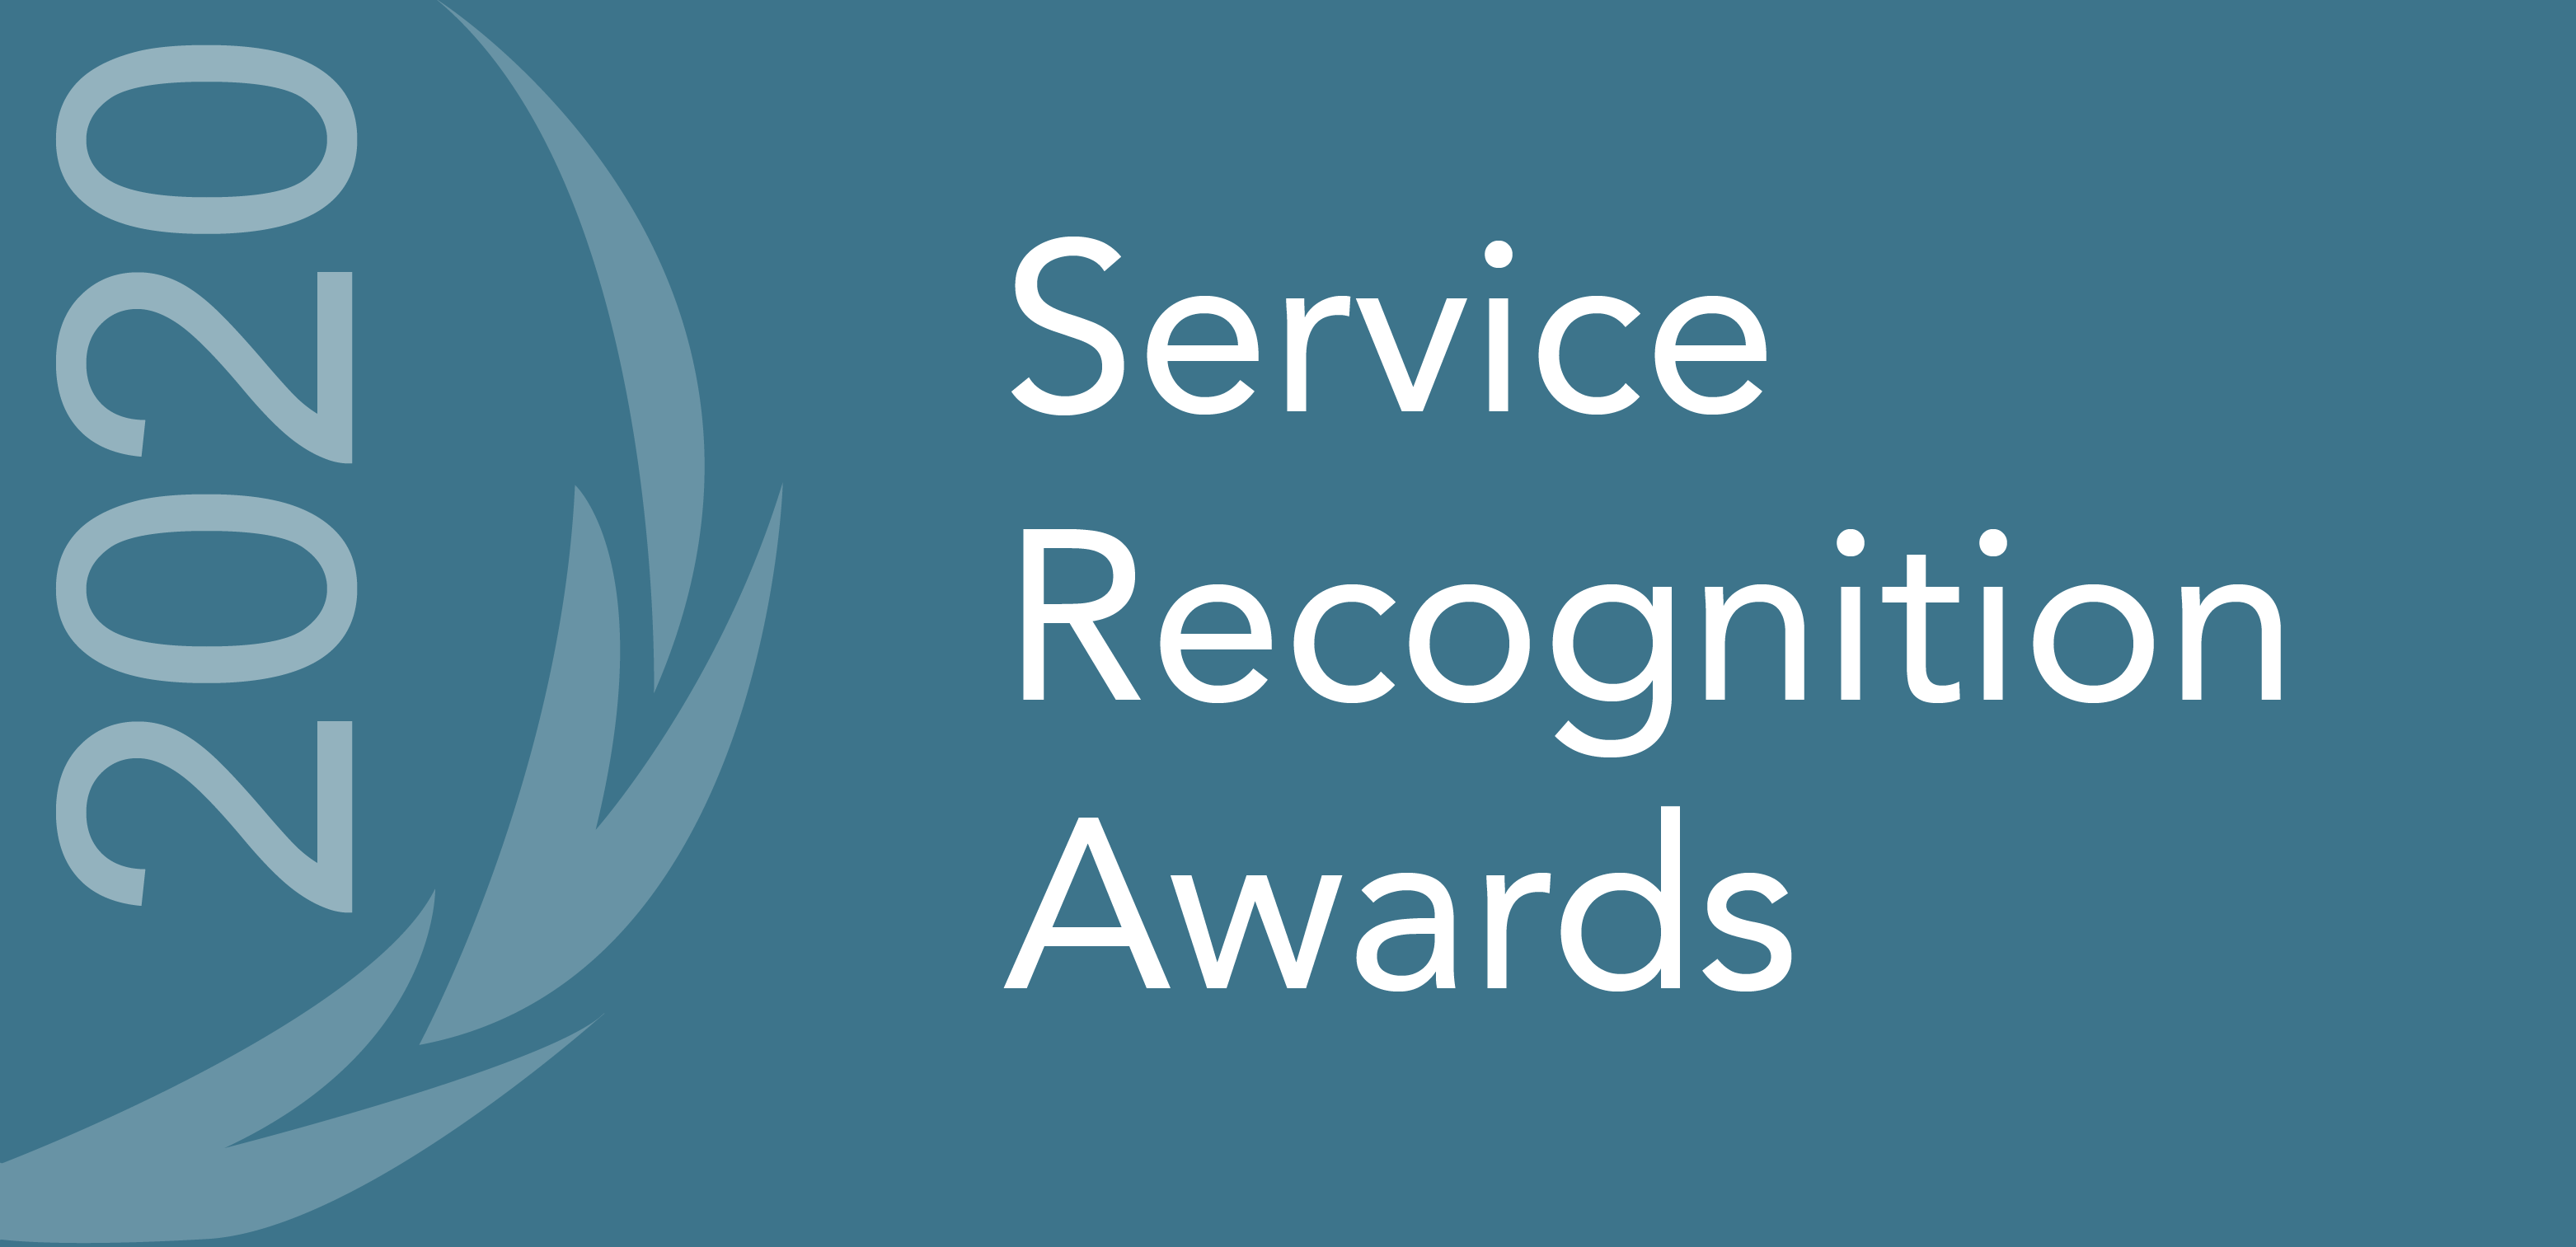 Service Recognition Awards 2020